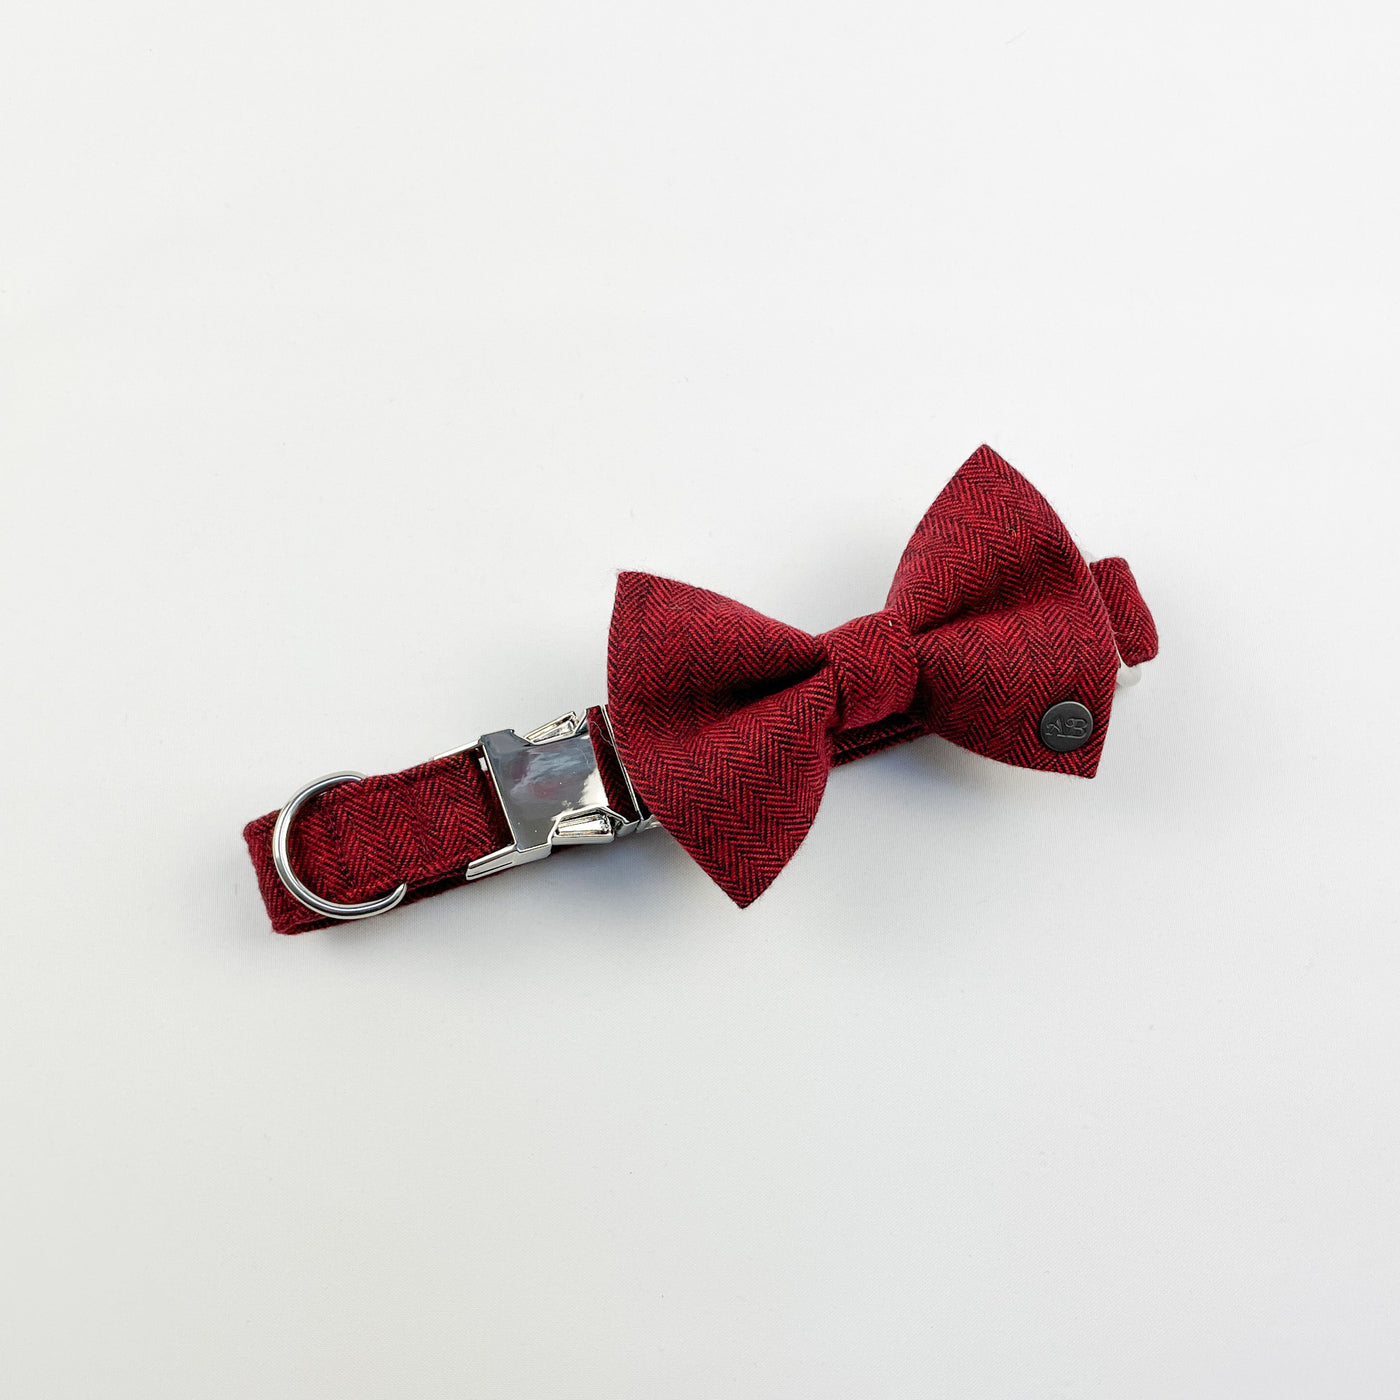 Cranberry herringbone dog bow tie on a matching collar